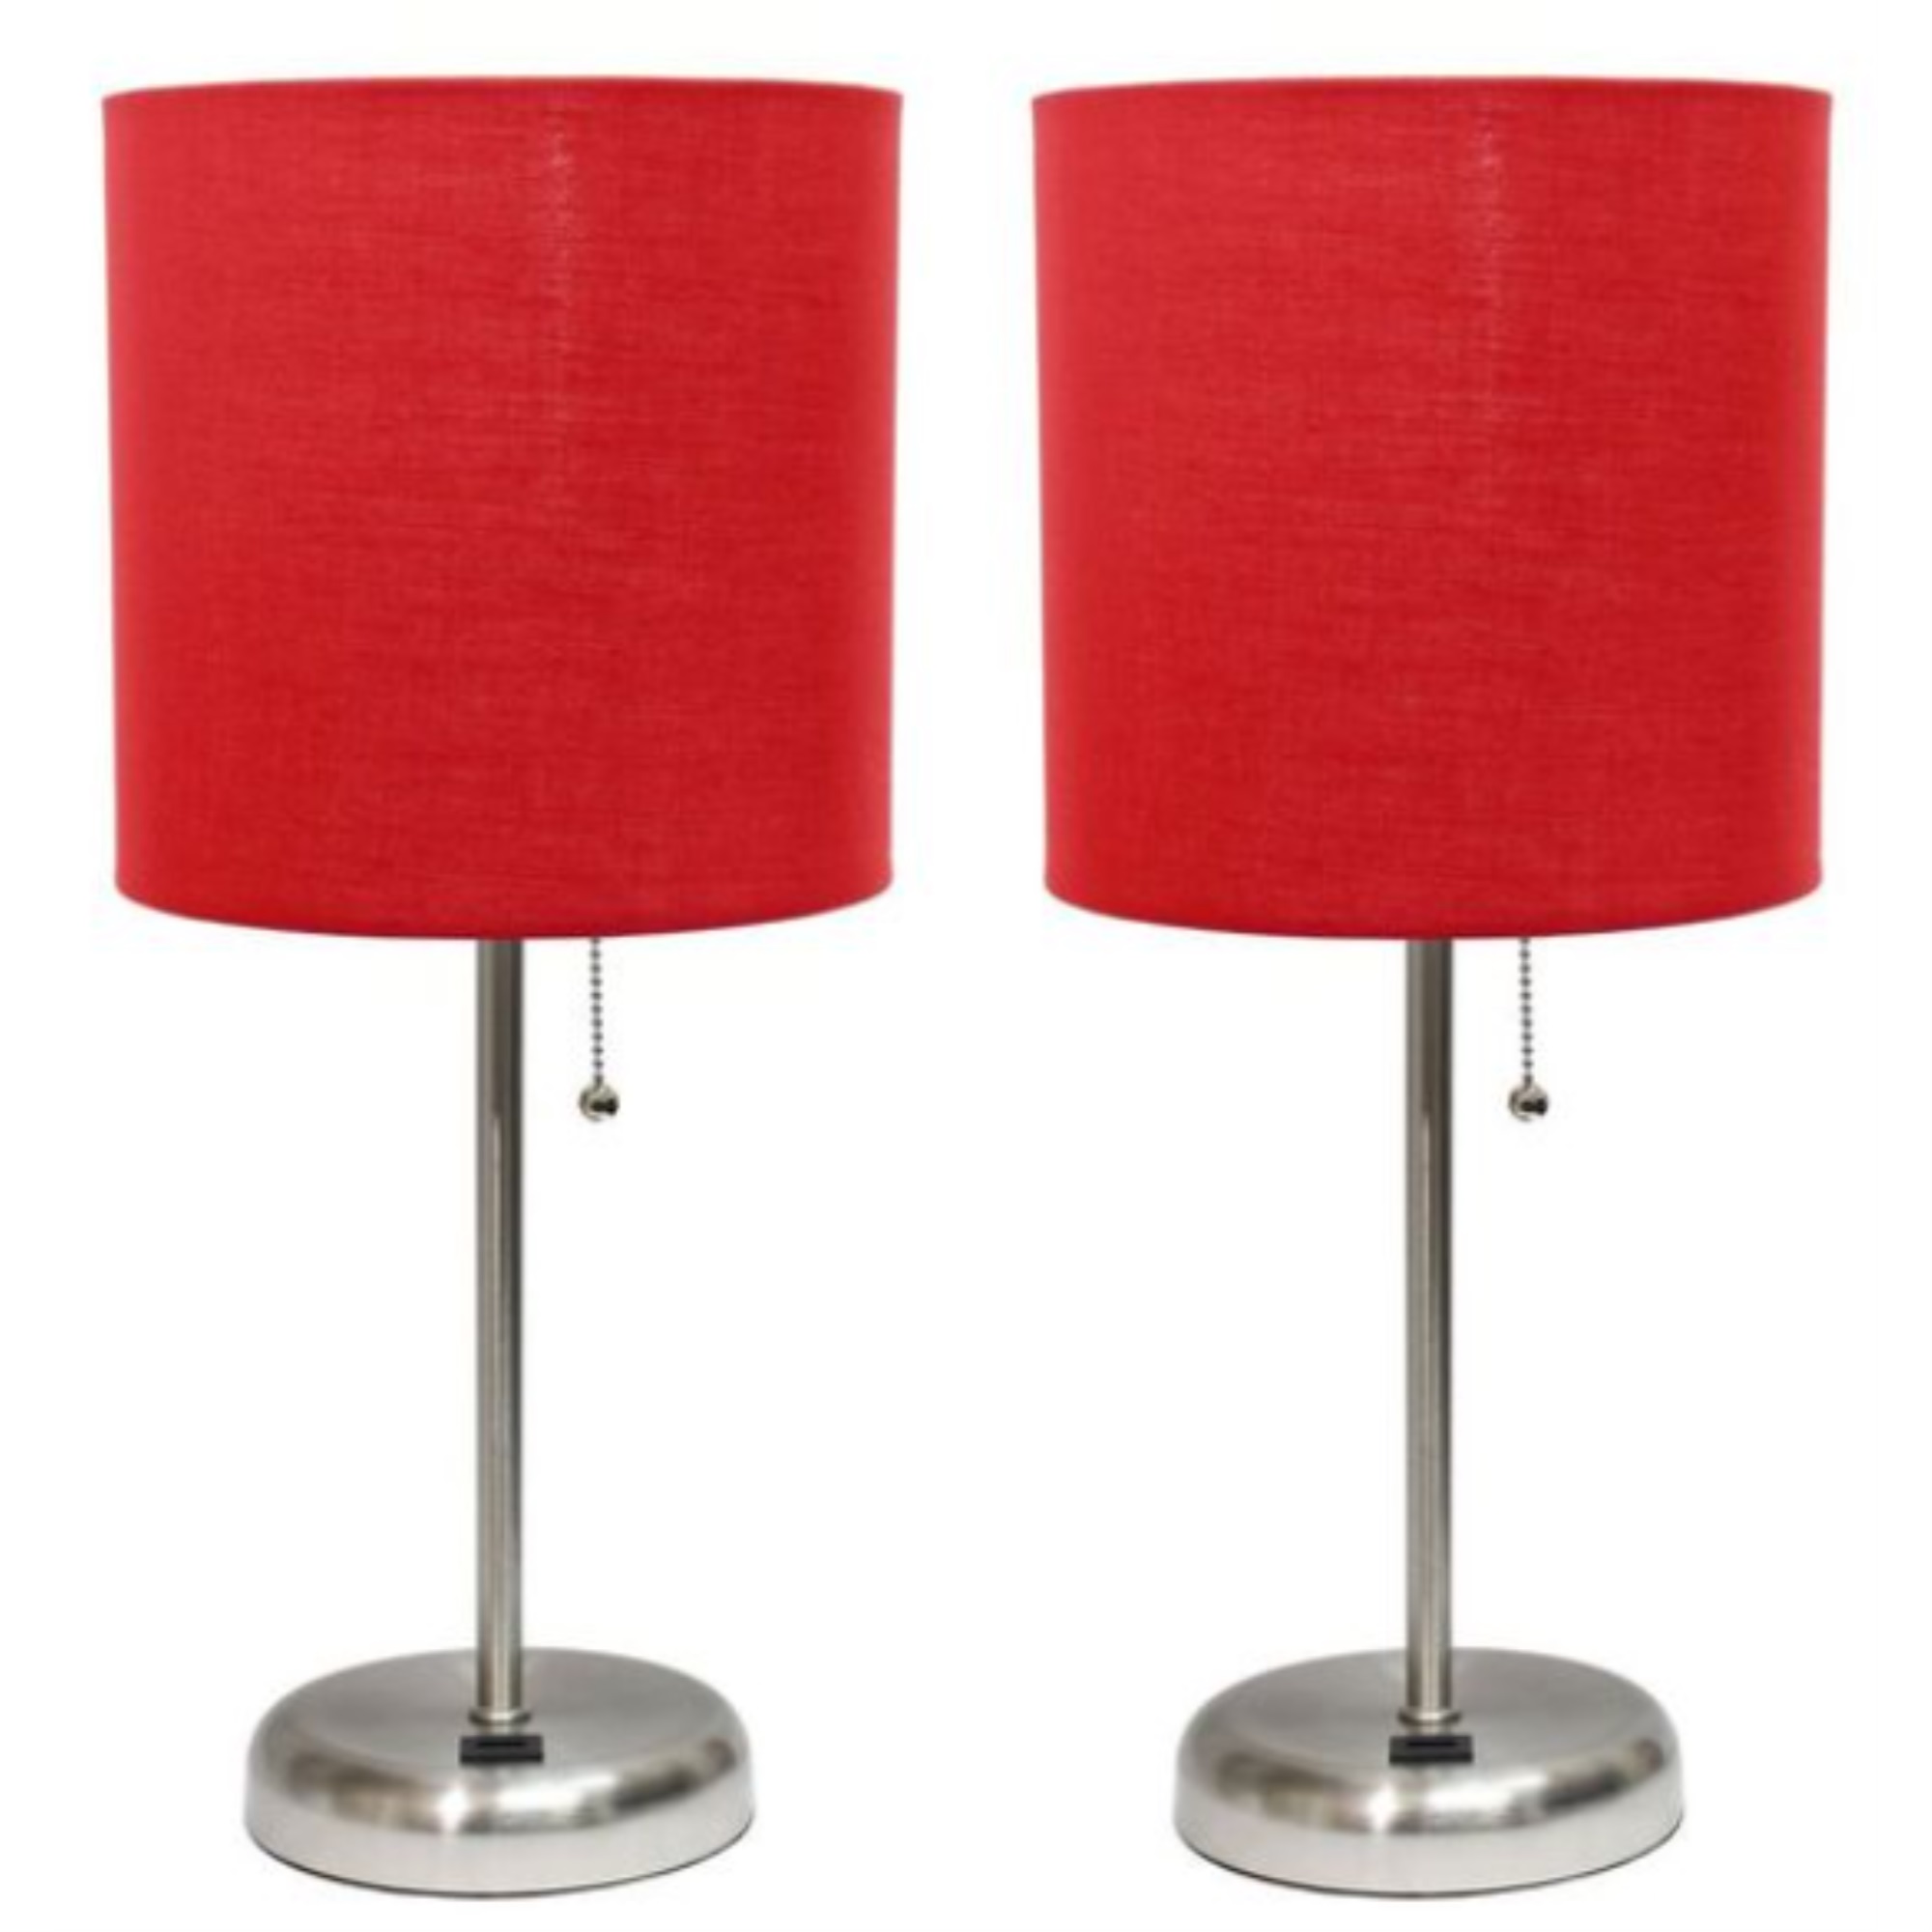 Simple Designs Stick Lamp with USB charging port and Fabric Shade 2 Pack Set, Red